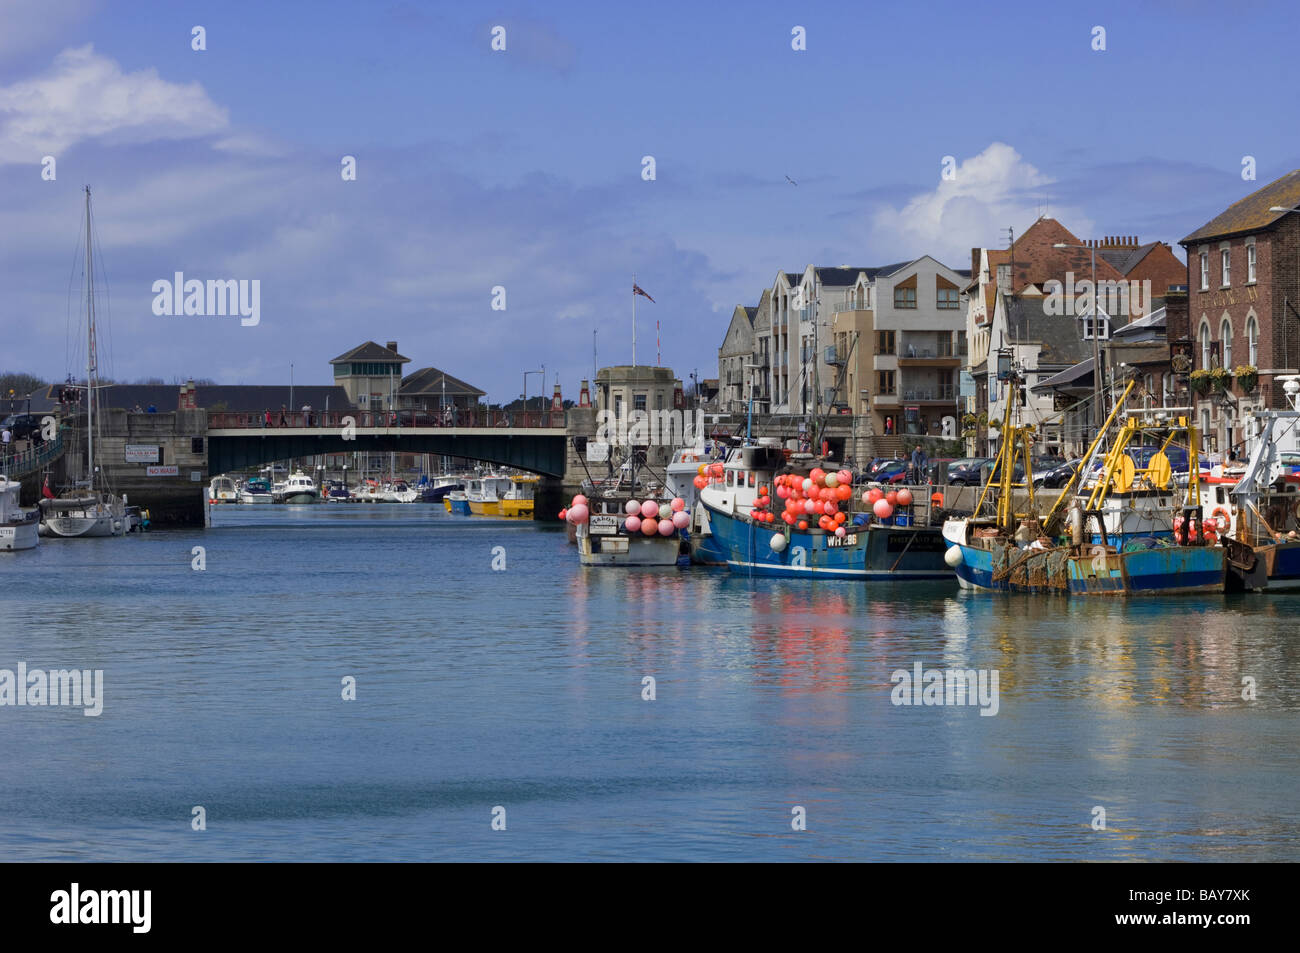 View of Weymouth Harbour in Dorset, England, on a sunny day. Stock Photo